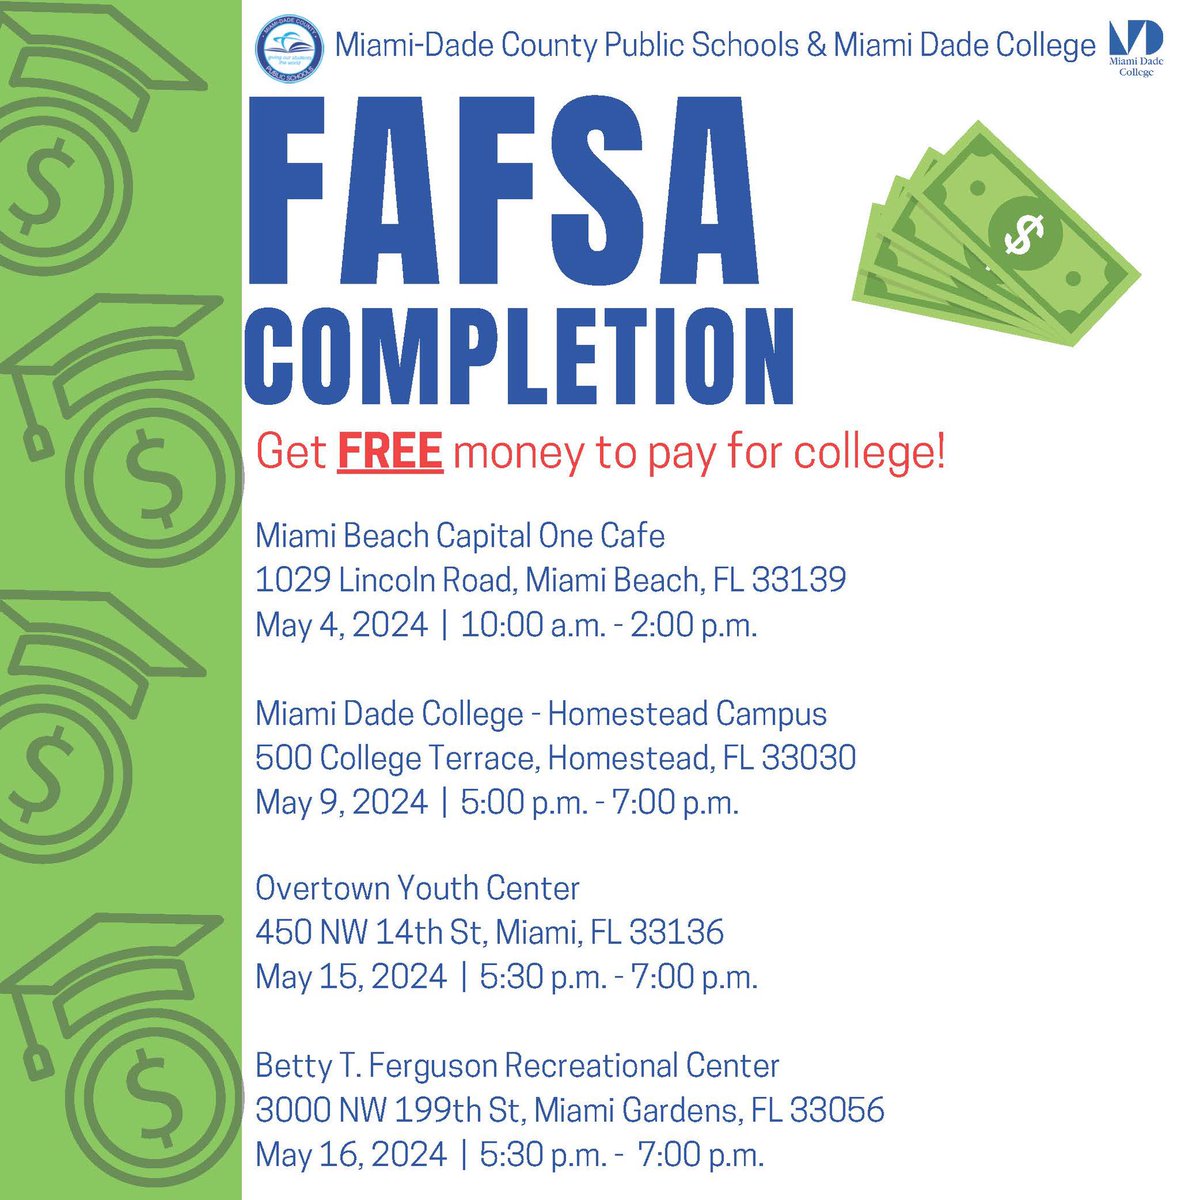 Parents do you need cash to help your High School Senior get to college? Join us at one of our upcoming FAFSA completion events where financial aid experts from @MDCollege will walk you through the application process! @MDCPS @SuptDotres @LDIAZ_CAO @AlayonSally